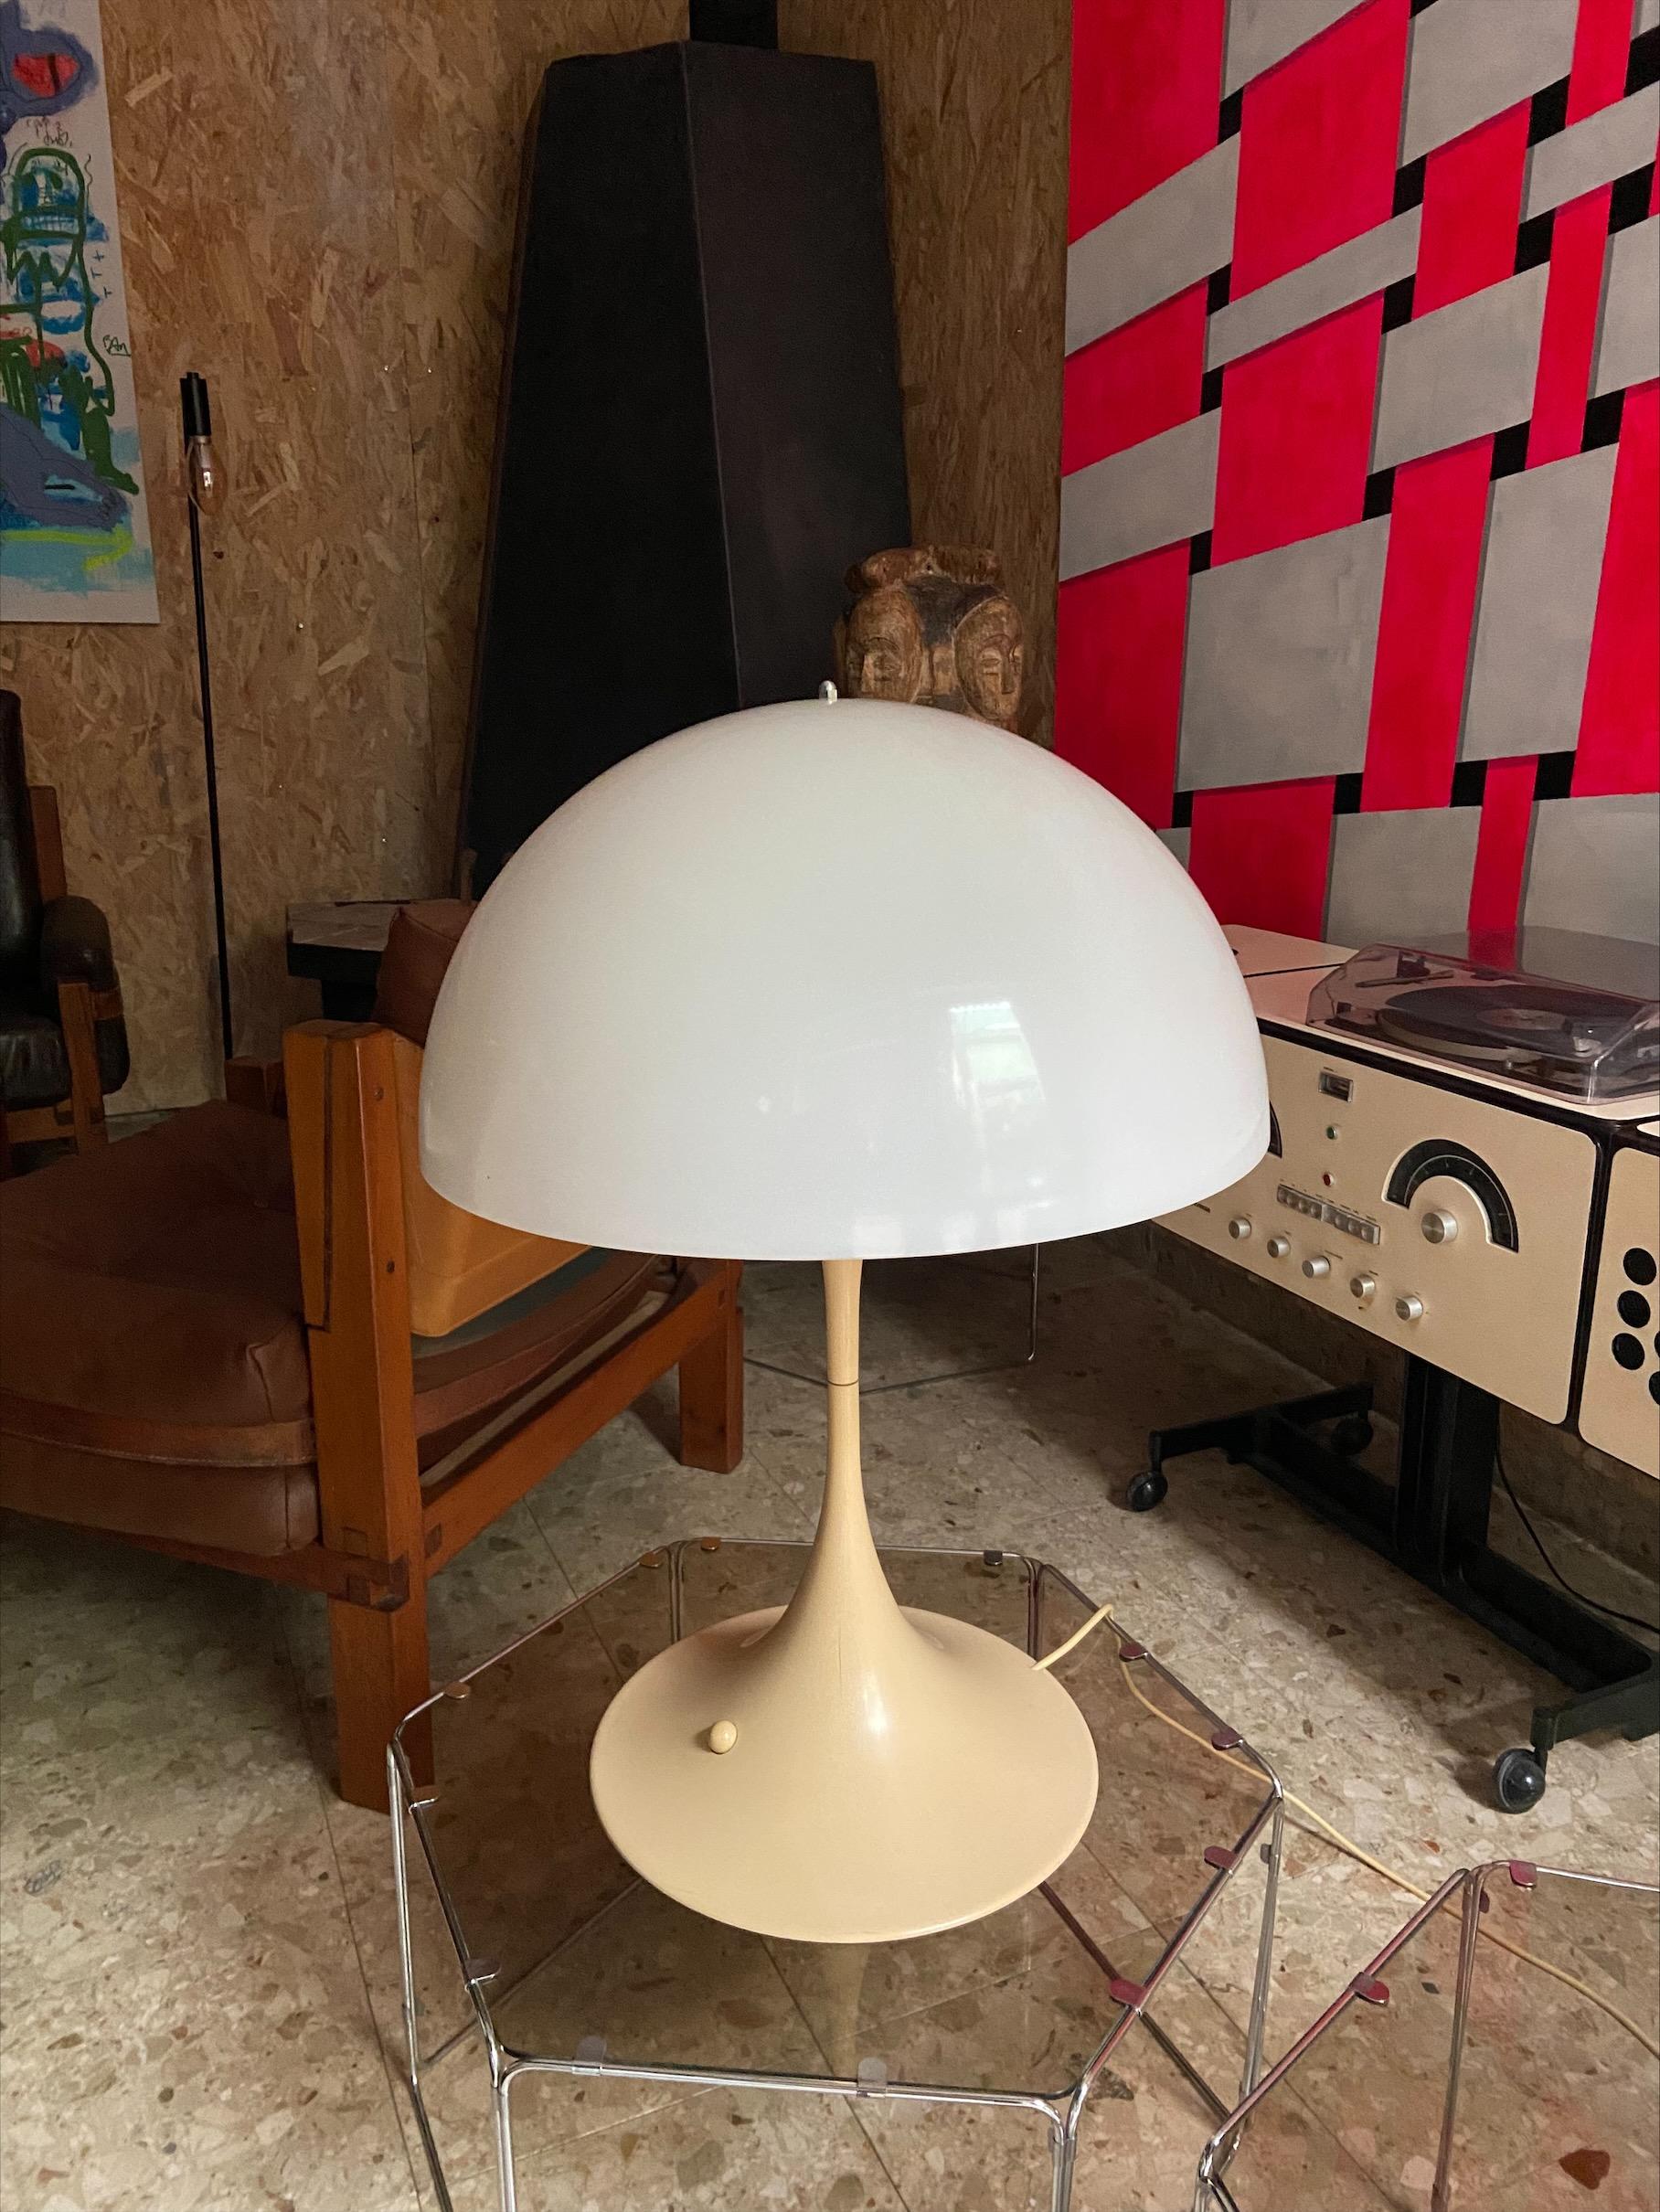 Vintage Panthella lamp - Verner Panton
Edition Louis Poulsen

Perspex

Circa 1971

Measures: H 70 x D 50cm

With its round lampshade and flared foot, the iconic Panthella lamp has a playful silhouette, emblematic of the seventies.
    